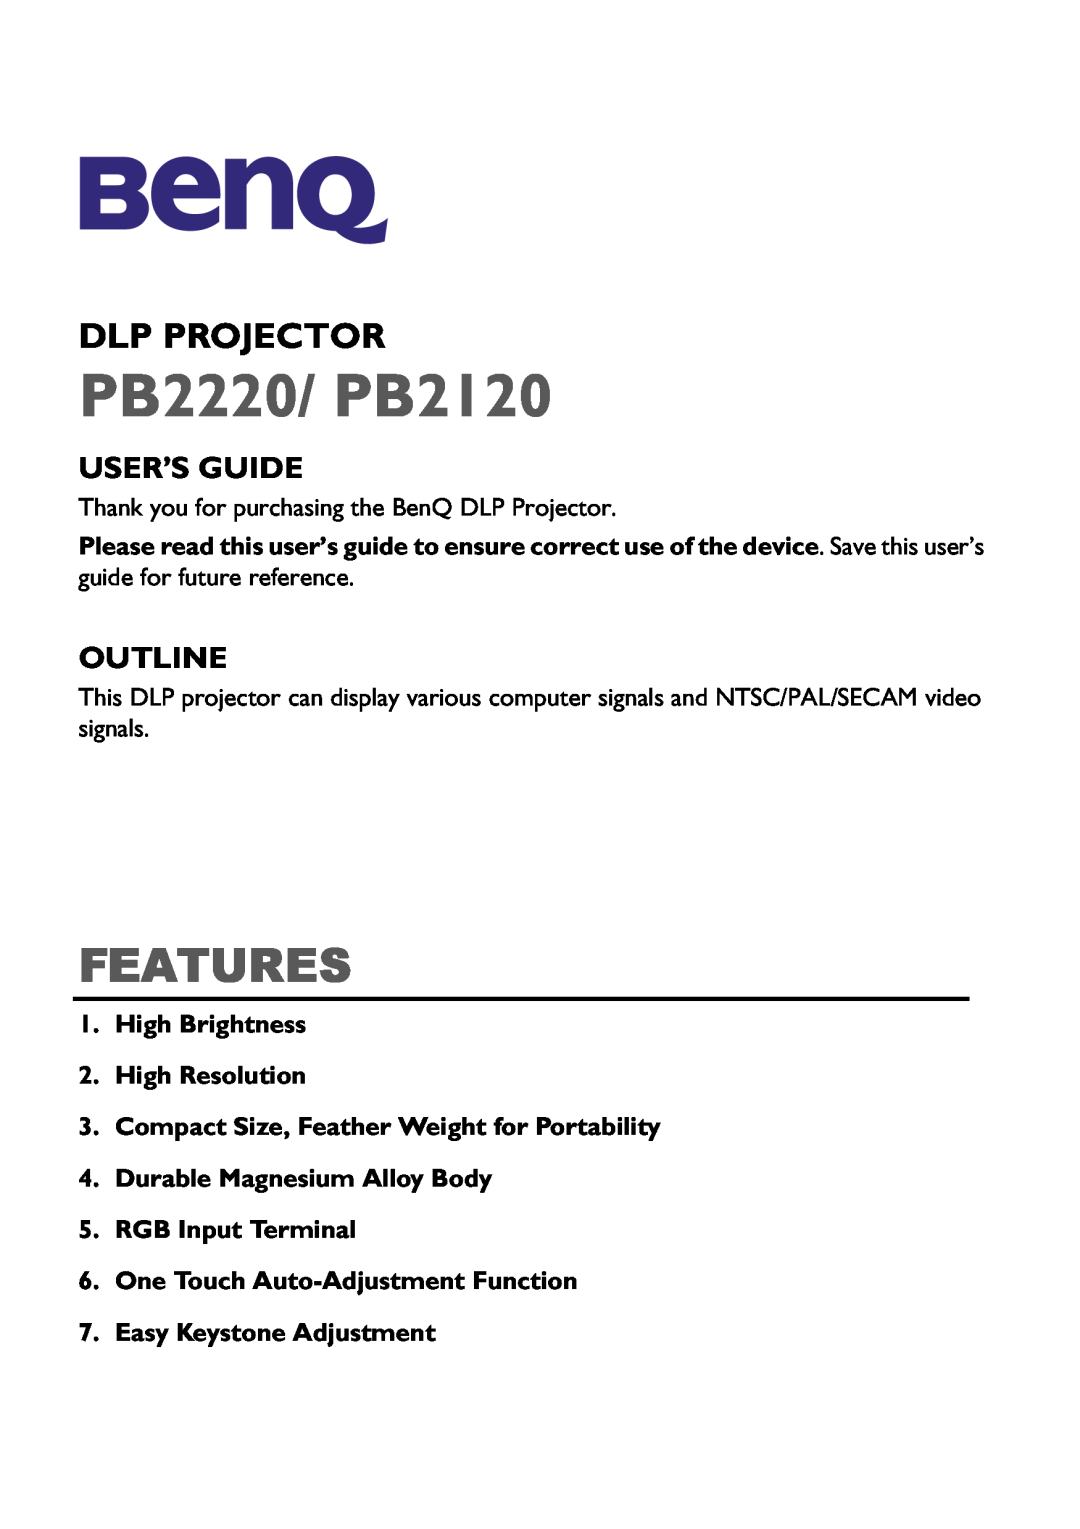 BenQ manual Dlp Projector, User’S Guide, Outline, High Brightness 2. High Resolution, PB2220/ PB2120, Features 